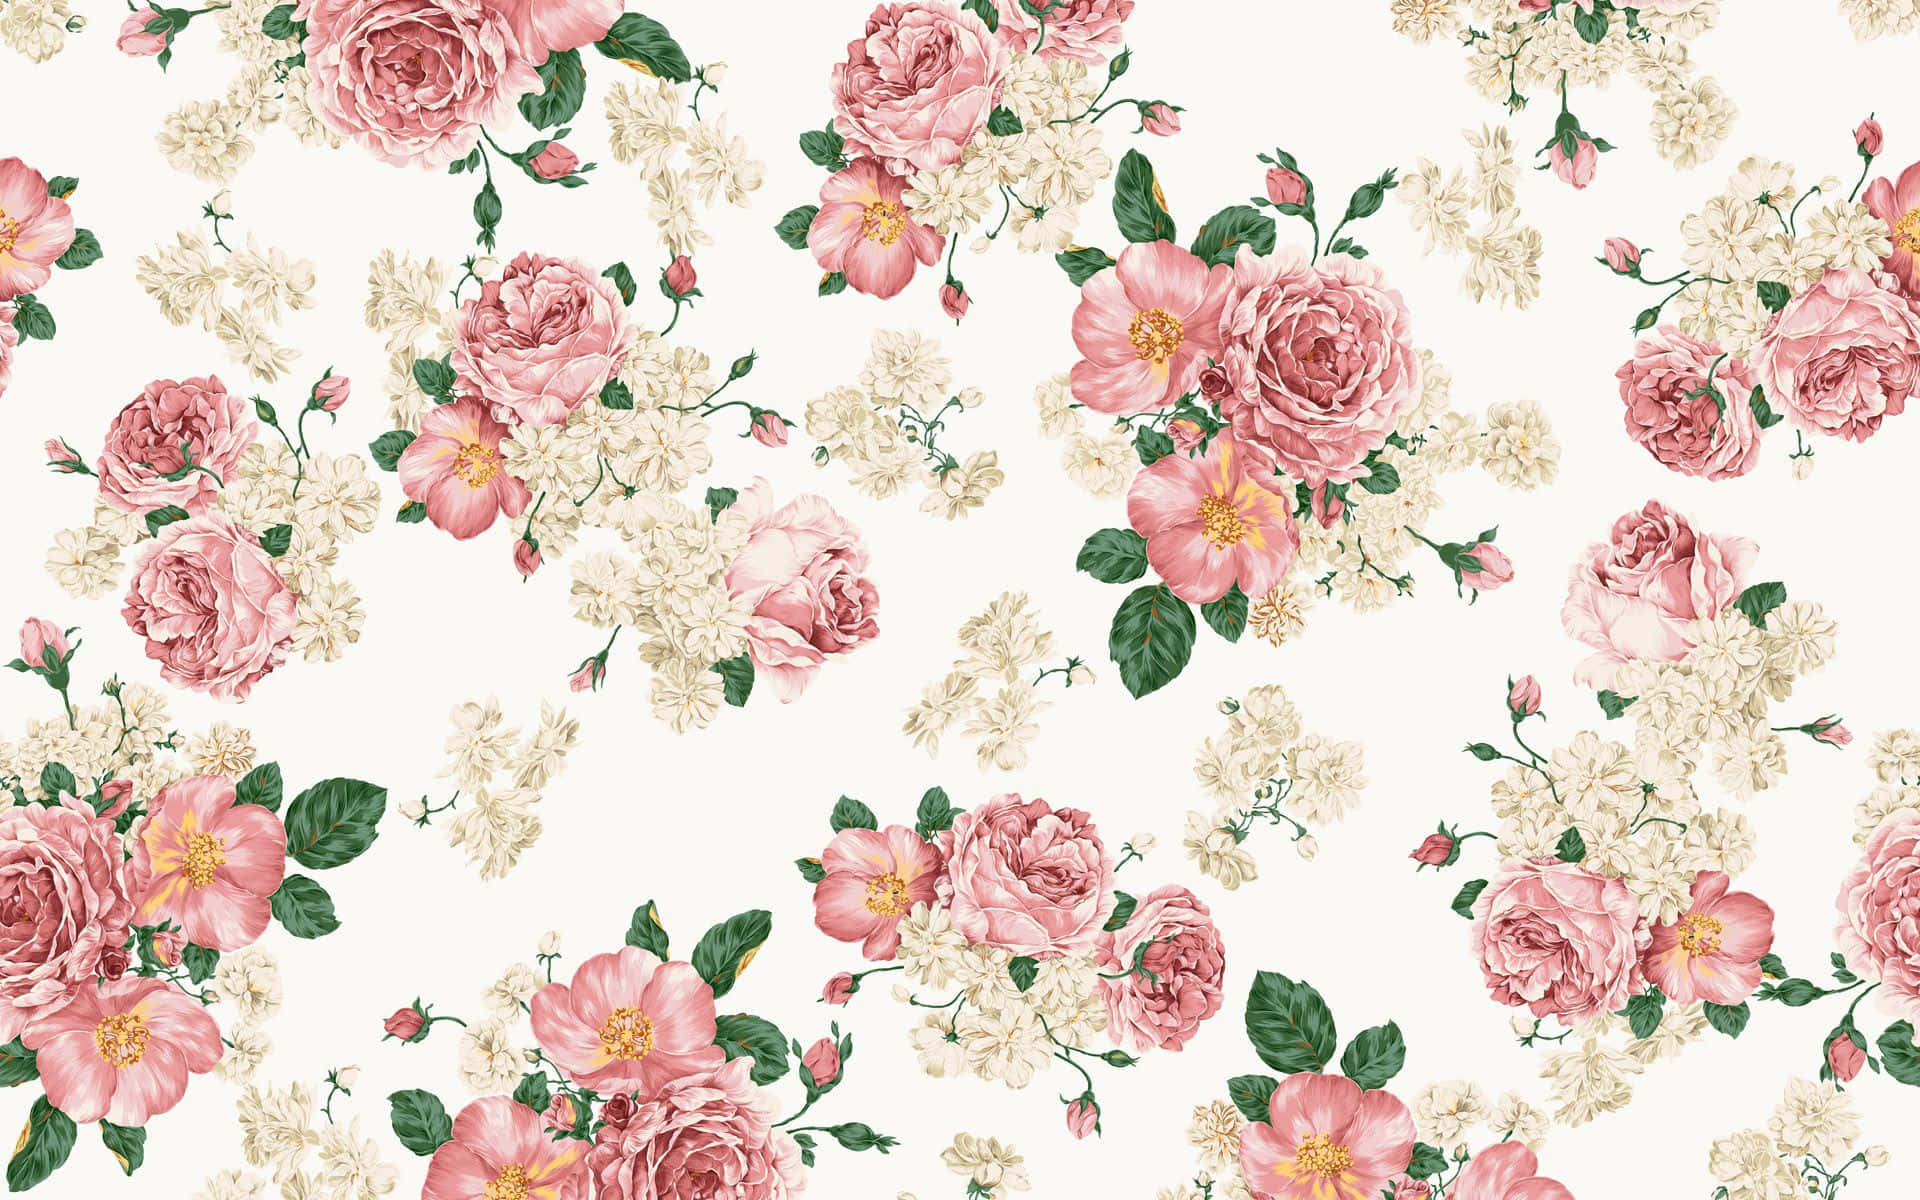 Bloom With Grace - Cute Floral Aesthetic Wallpaper Wallpaper